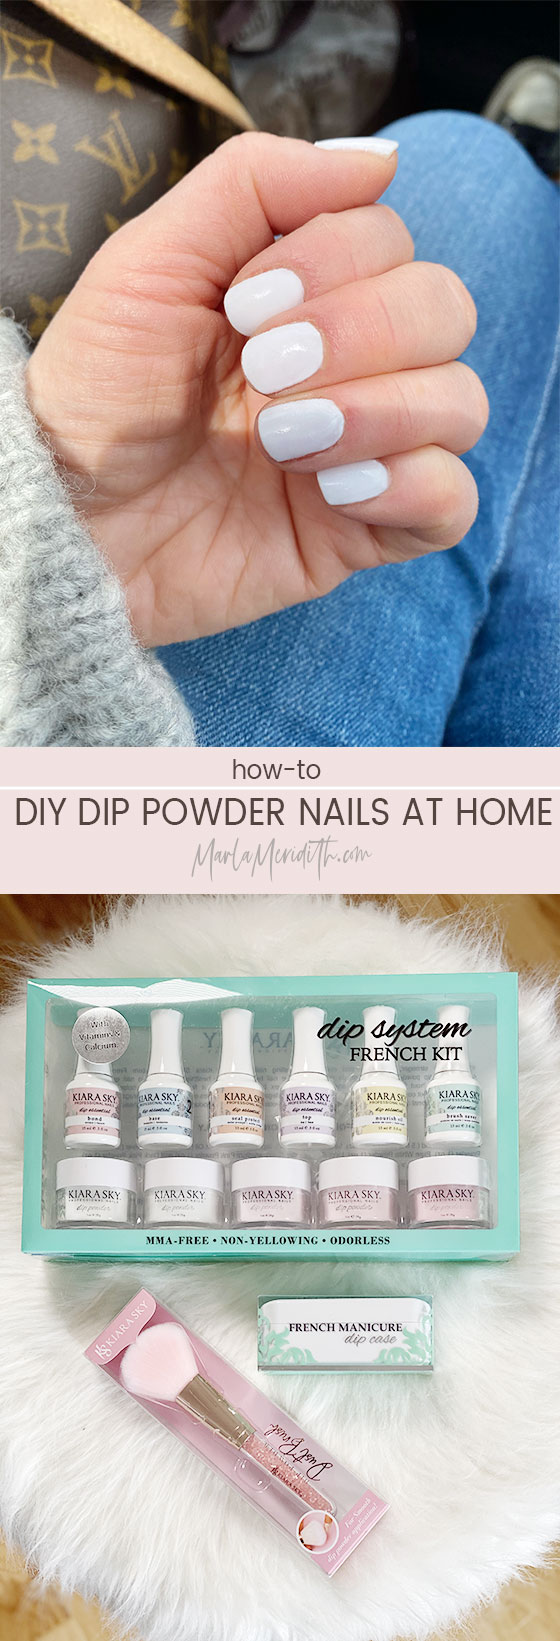 DIY Dip Powder Nails at Home. Includes a How-To Video